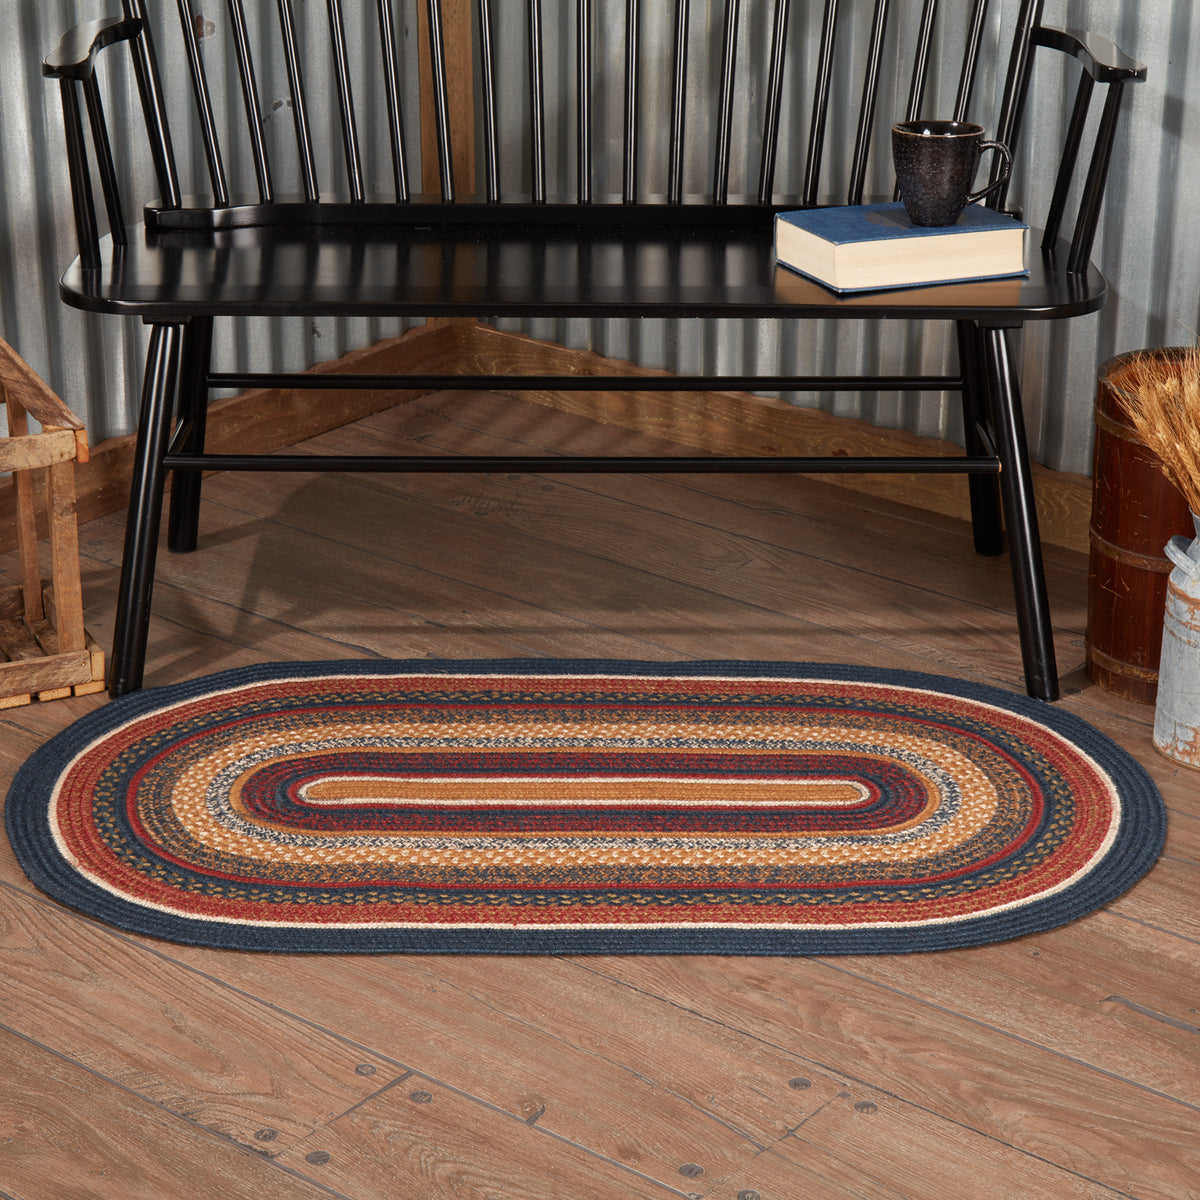 VHC Brands Braided Rug - Kaila Jute Rug Oval with Pad 27x48